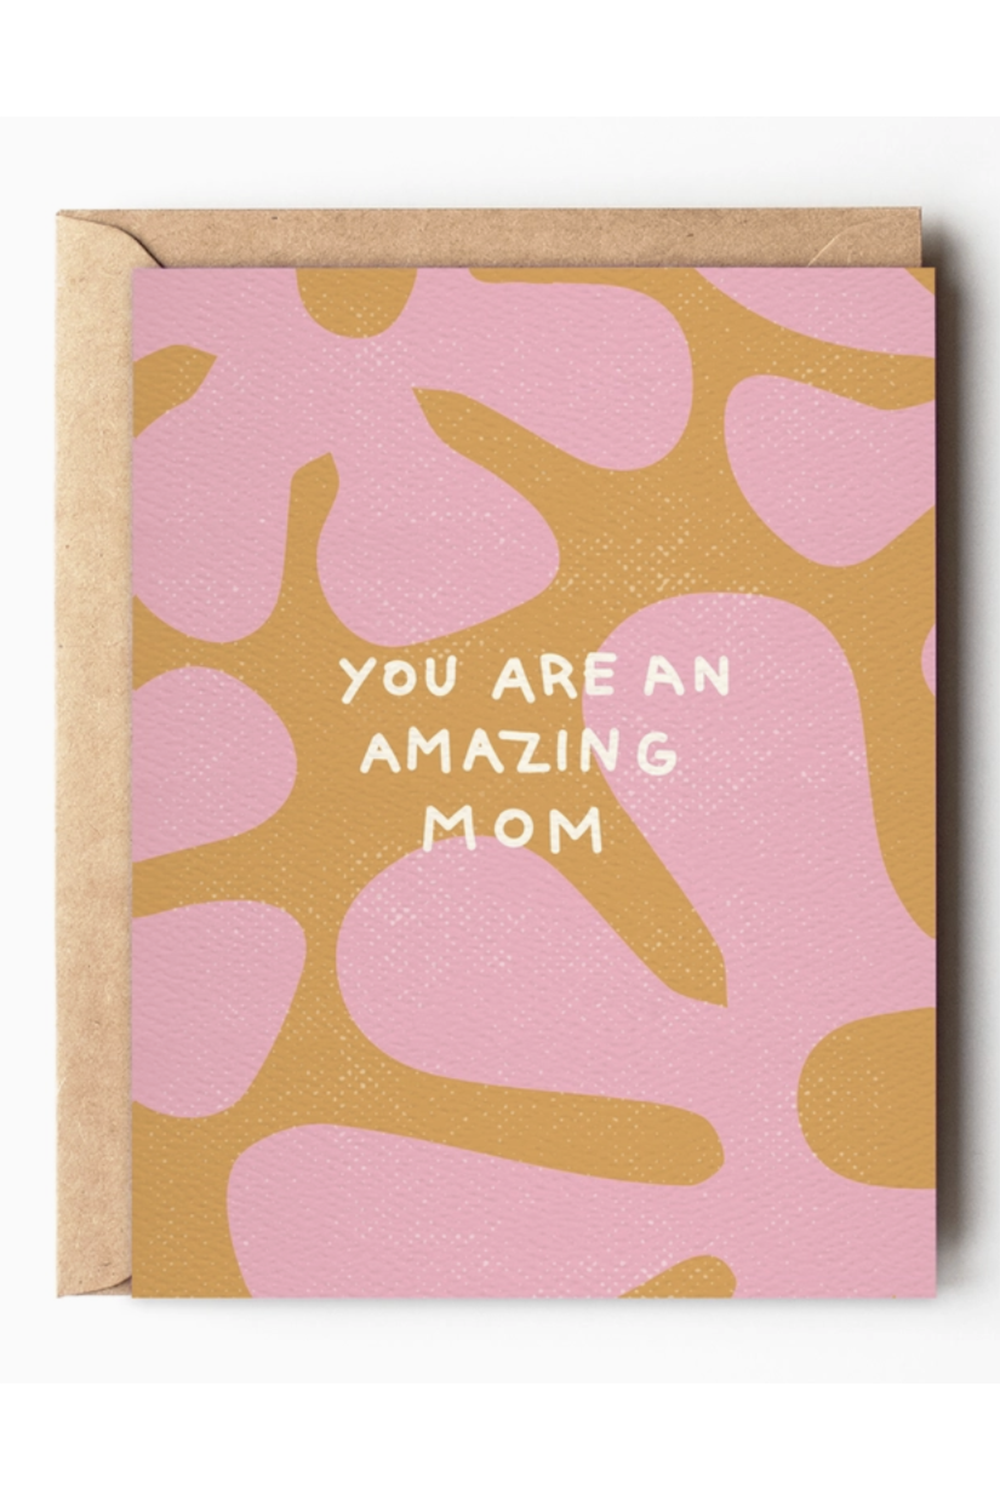 DD Mother's Day Card - Amazing Mom